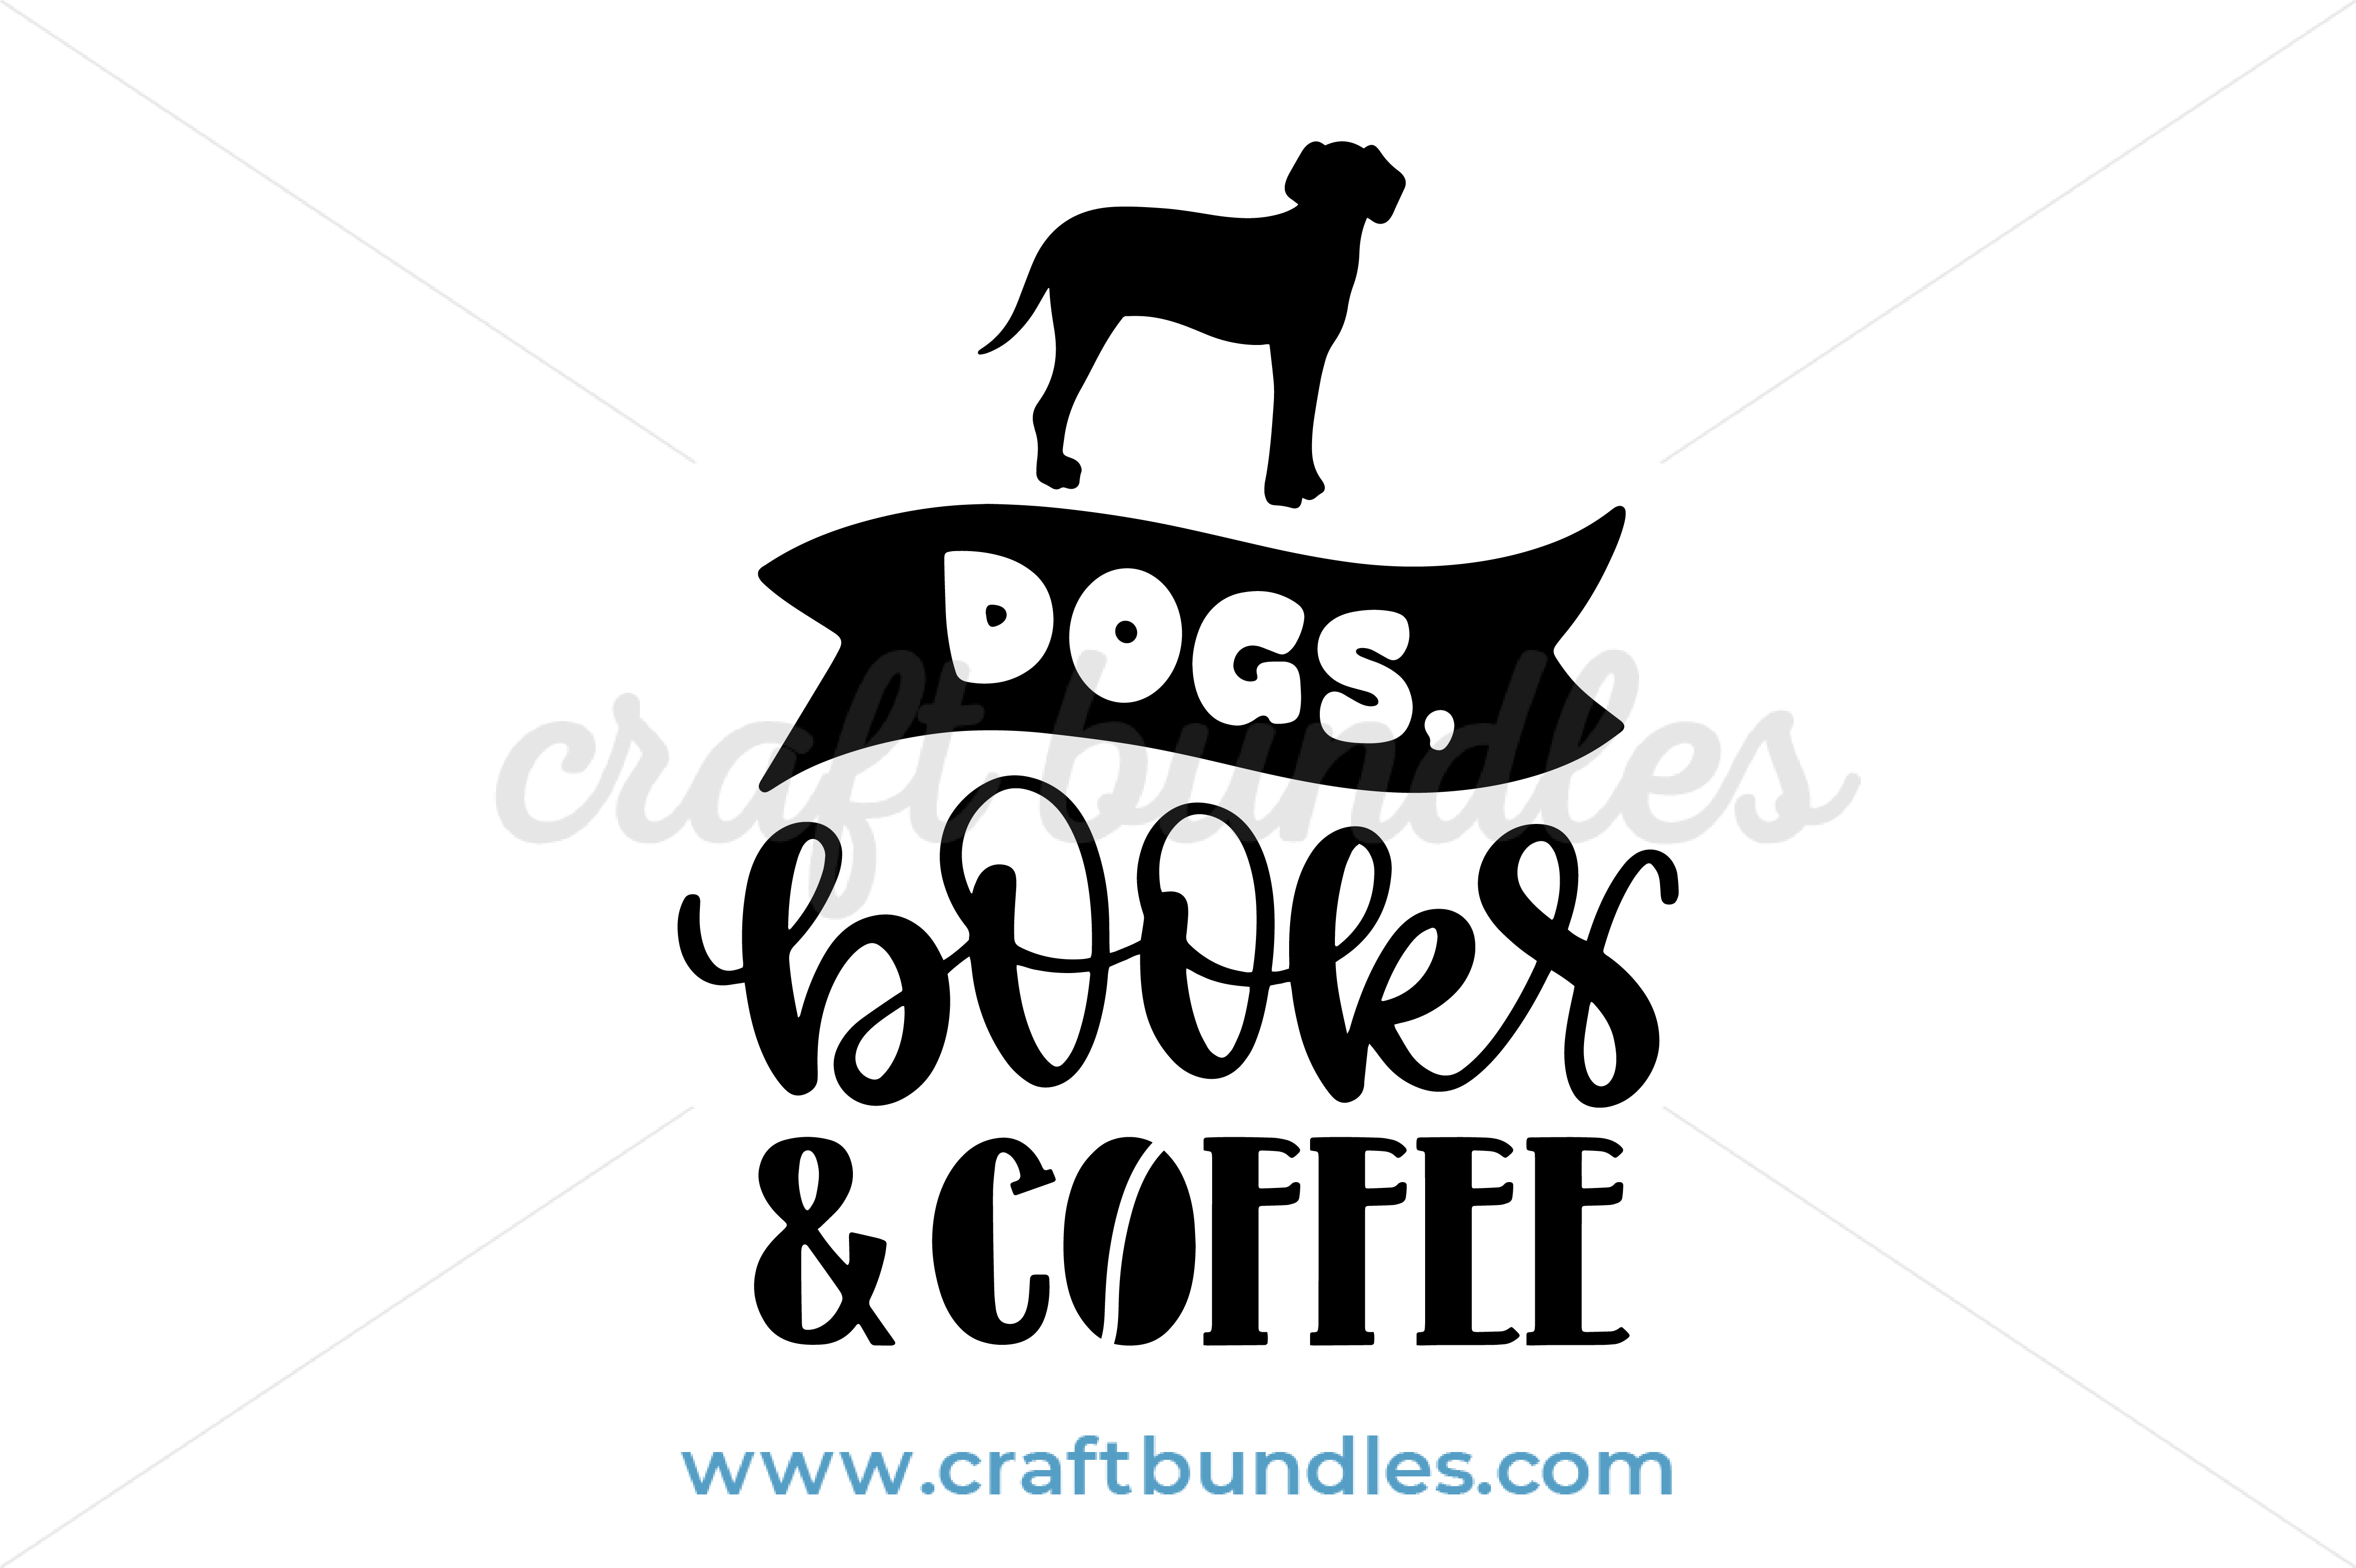 Download Dogs Books And Coffee Svg Cut File Craftbundles